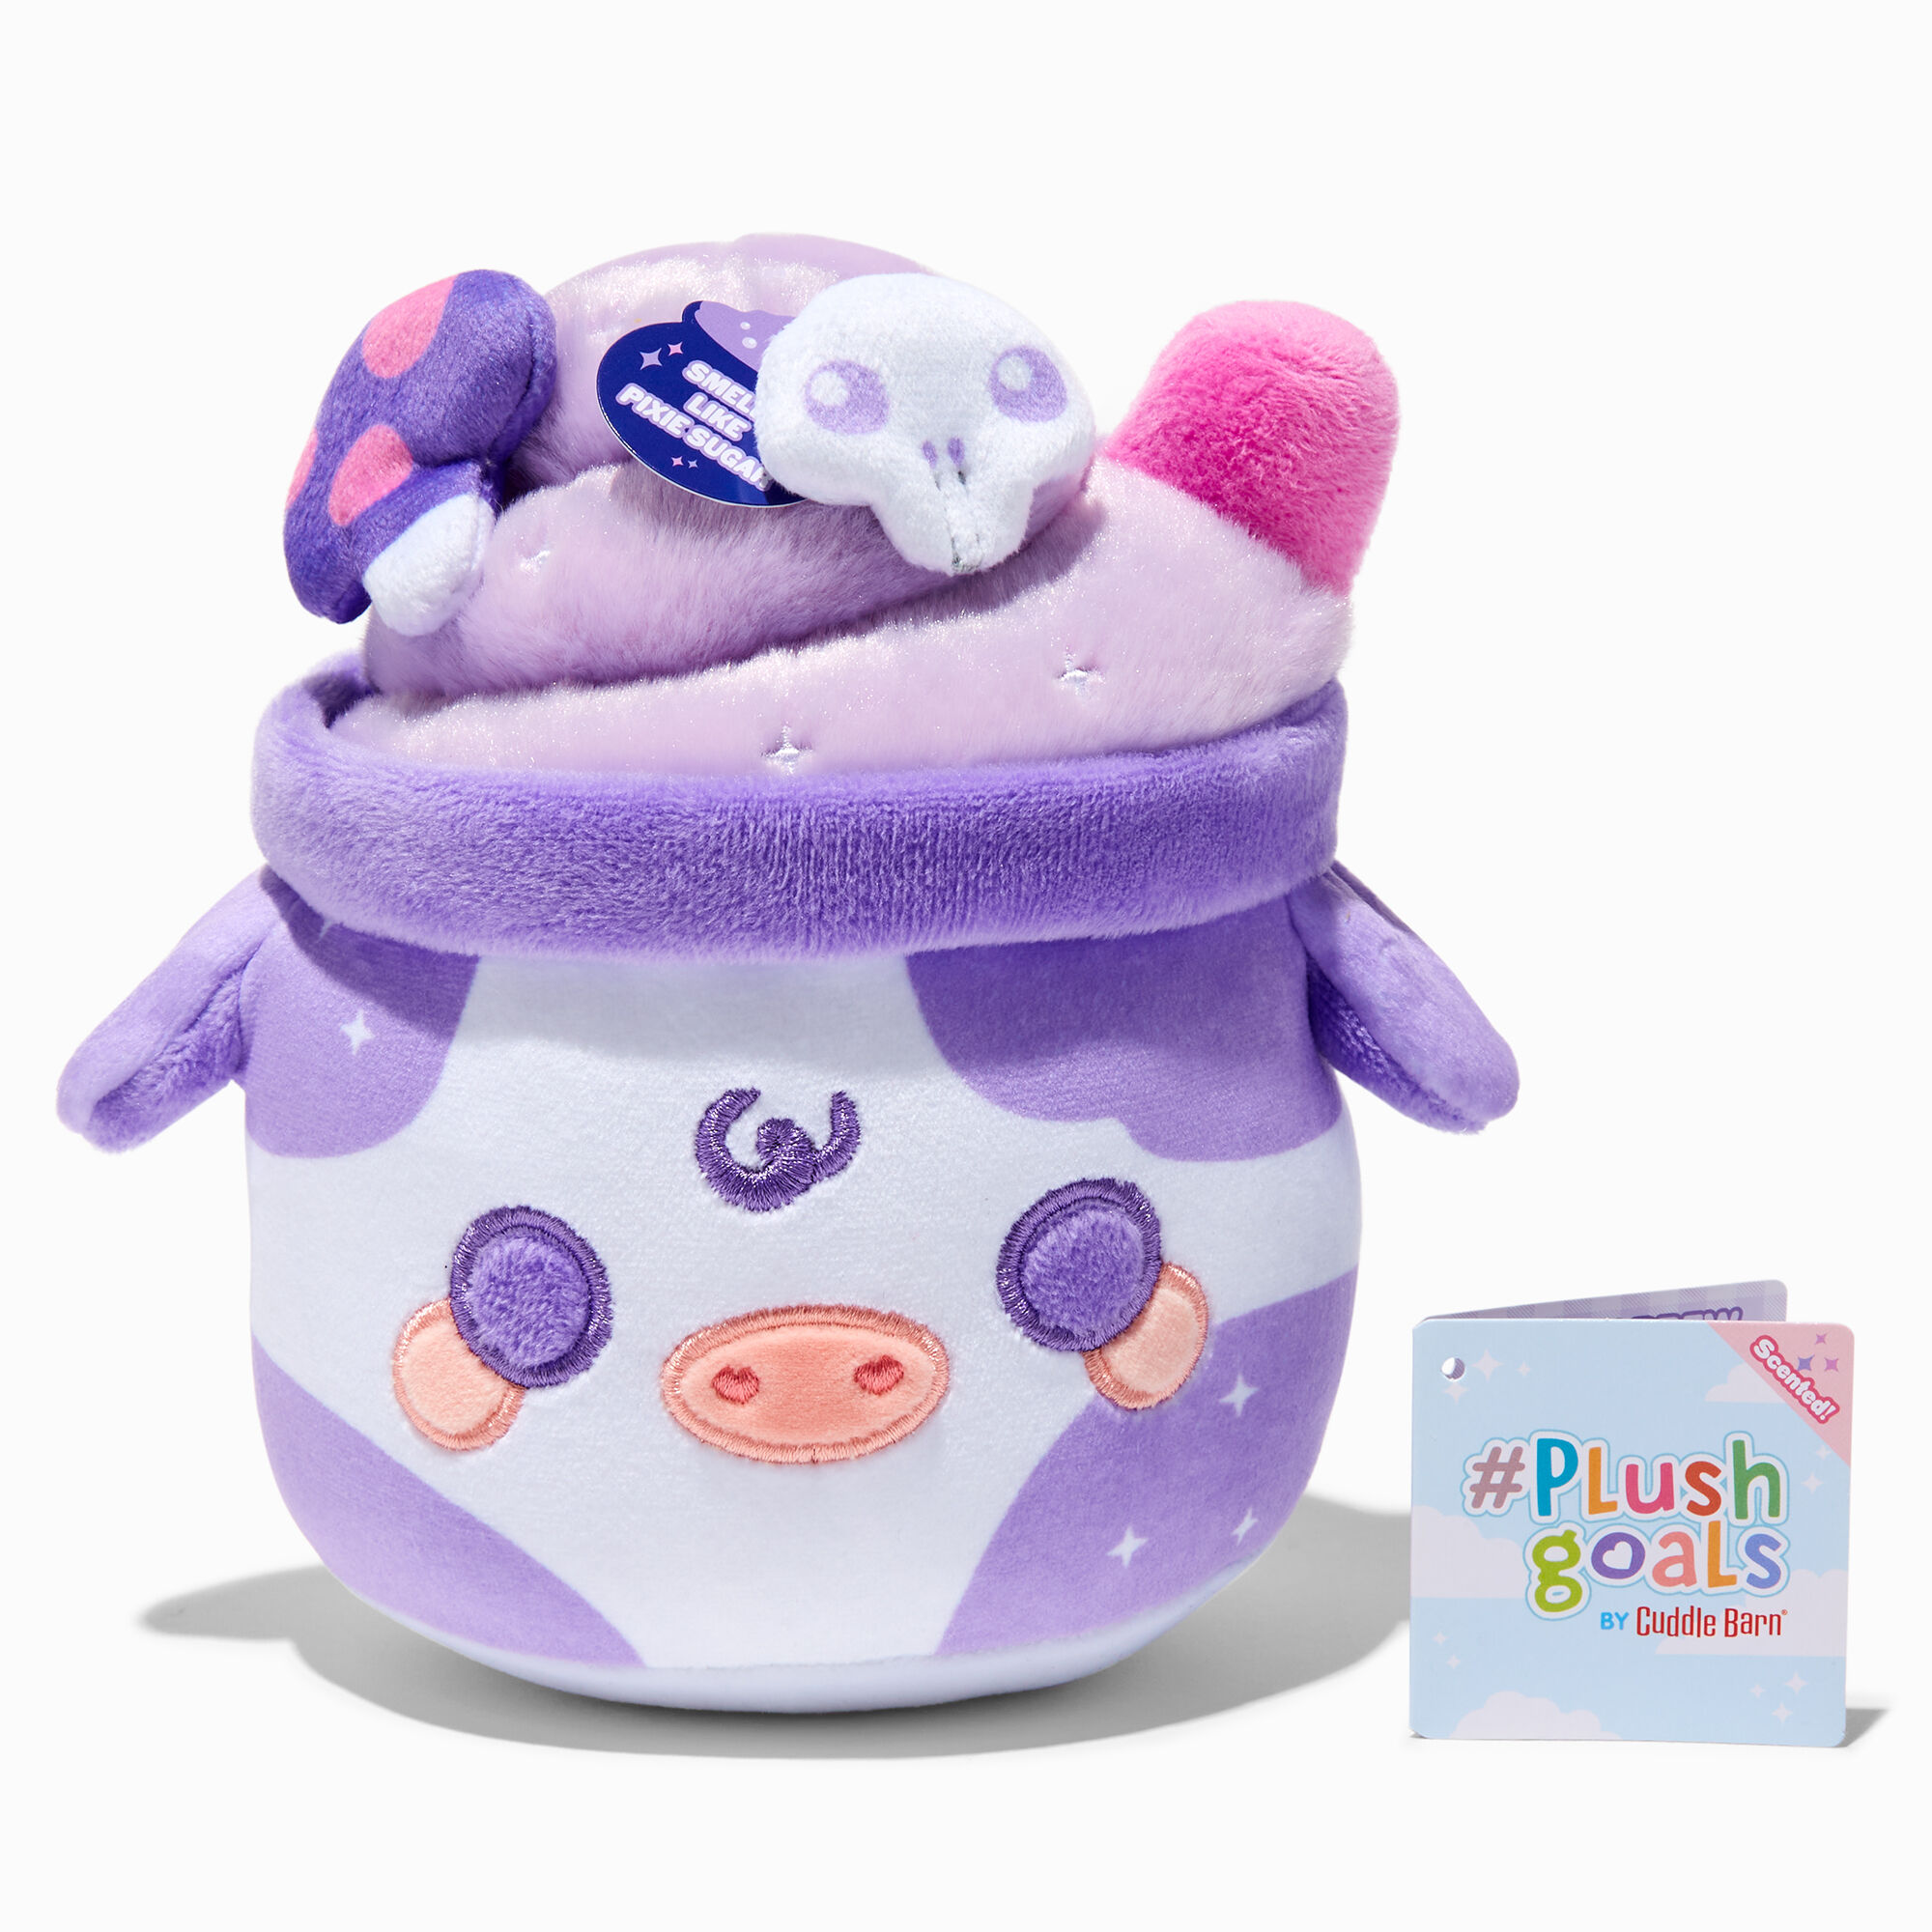 View Claires plush Goals By Cuddle Barn 8 Witchy Vibes Mooshake Plush Toy information